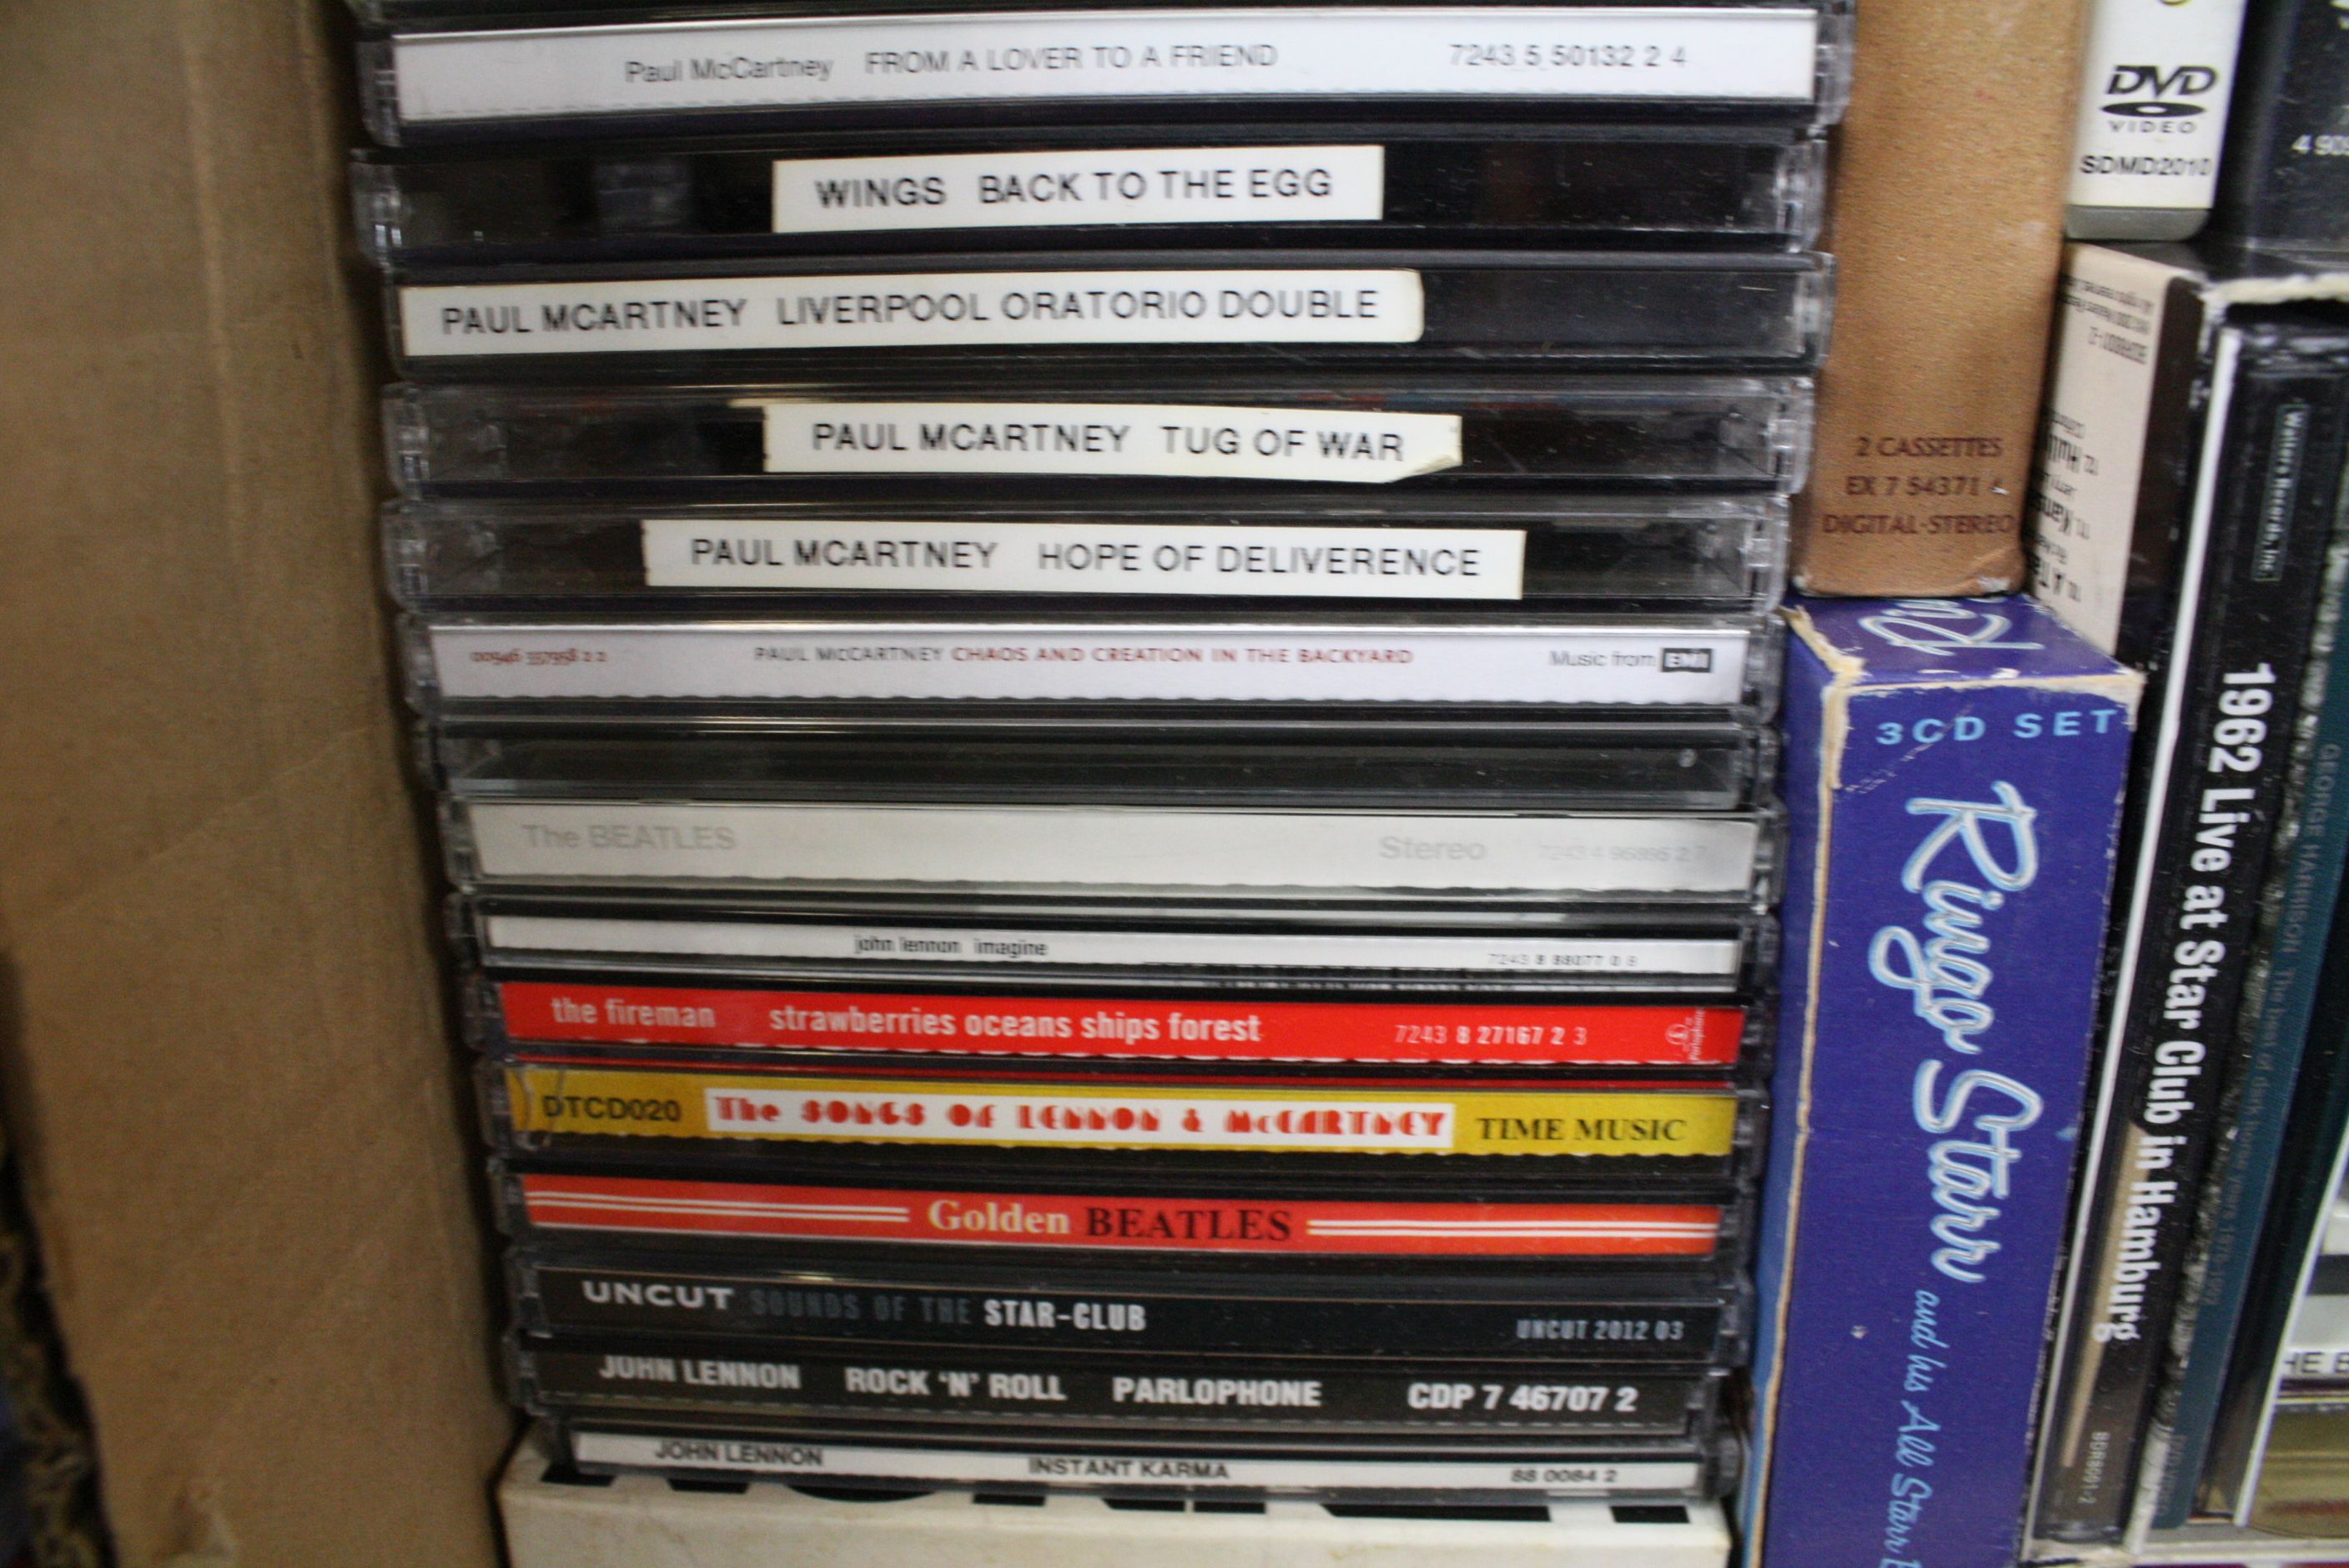 CDs - Over 150 Beatles and related CD's including imports, box sets, singles, giveaways, private - Image 8 of 18